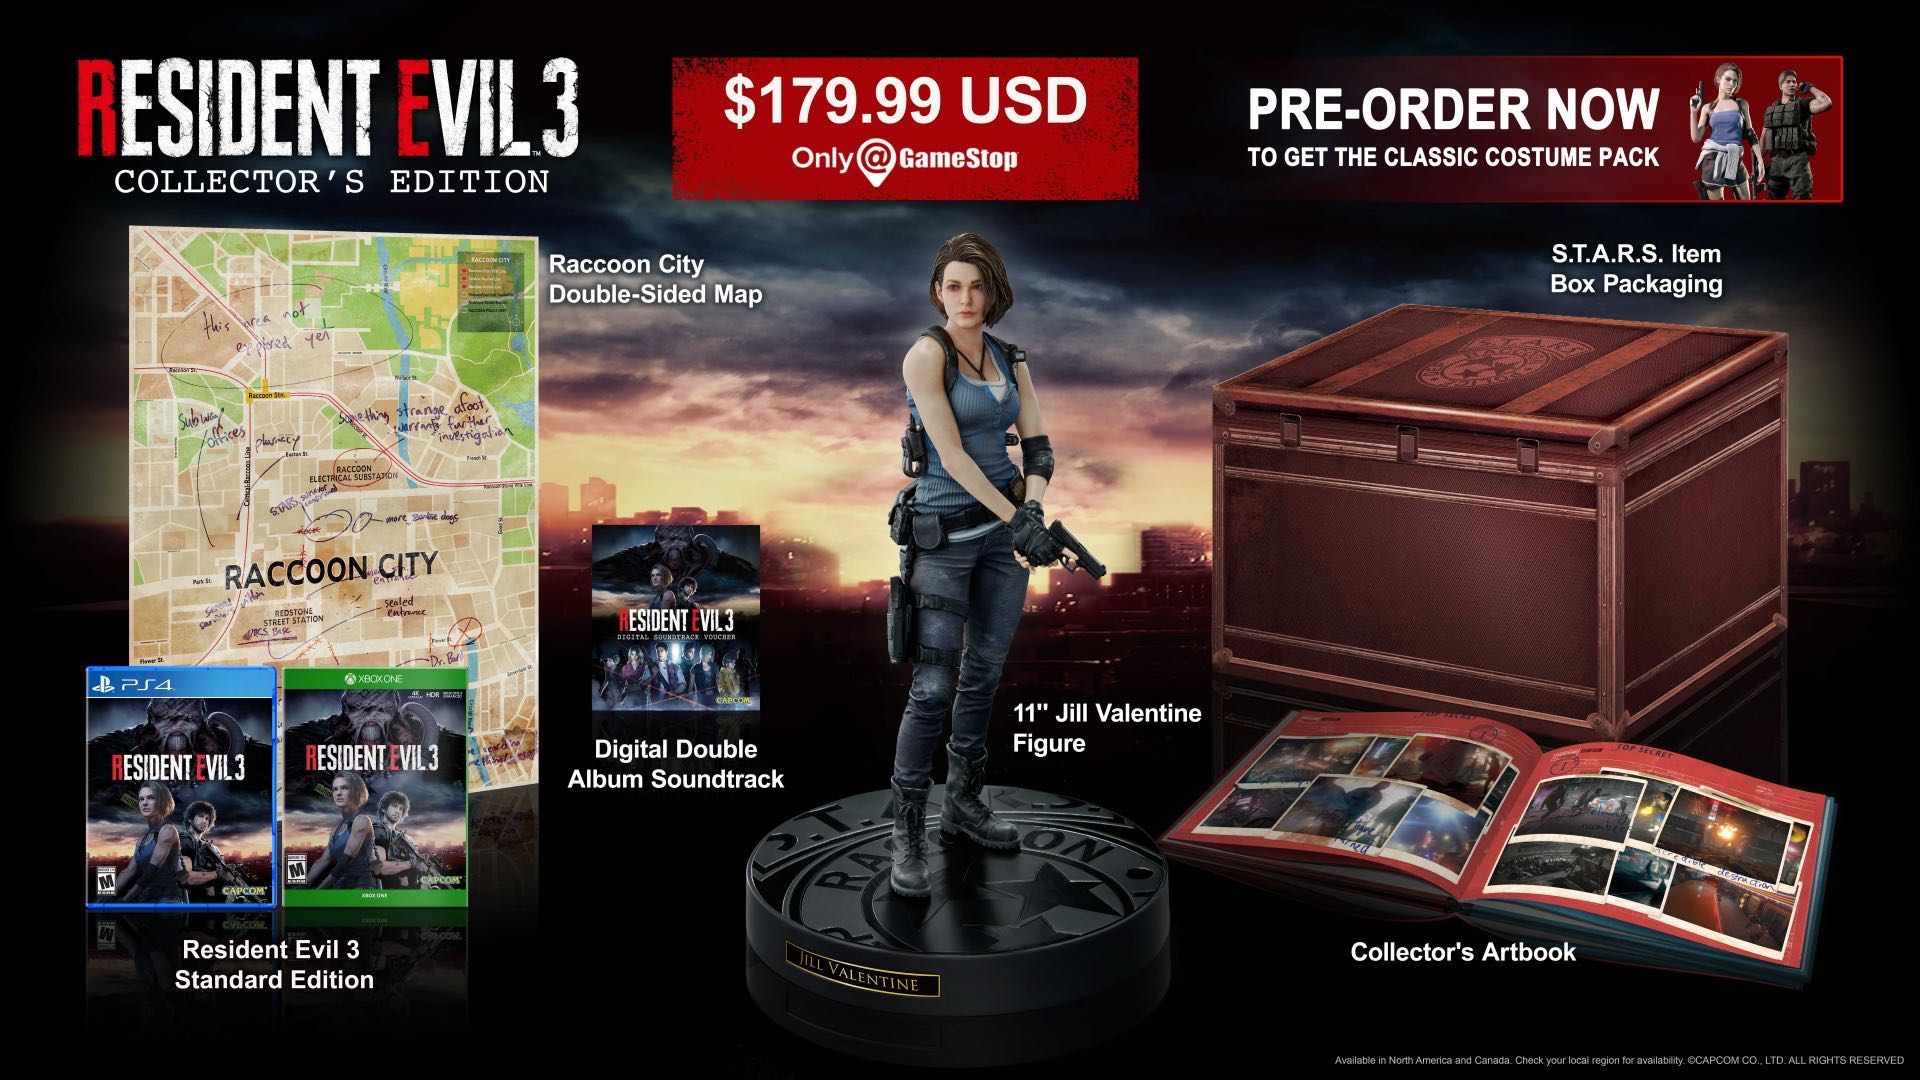 Resident Evil 3 collector's edition